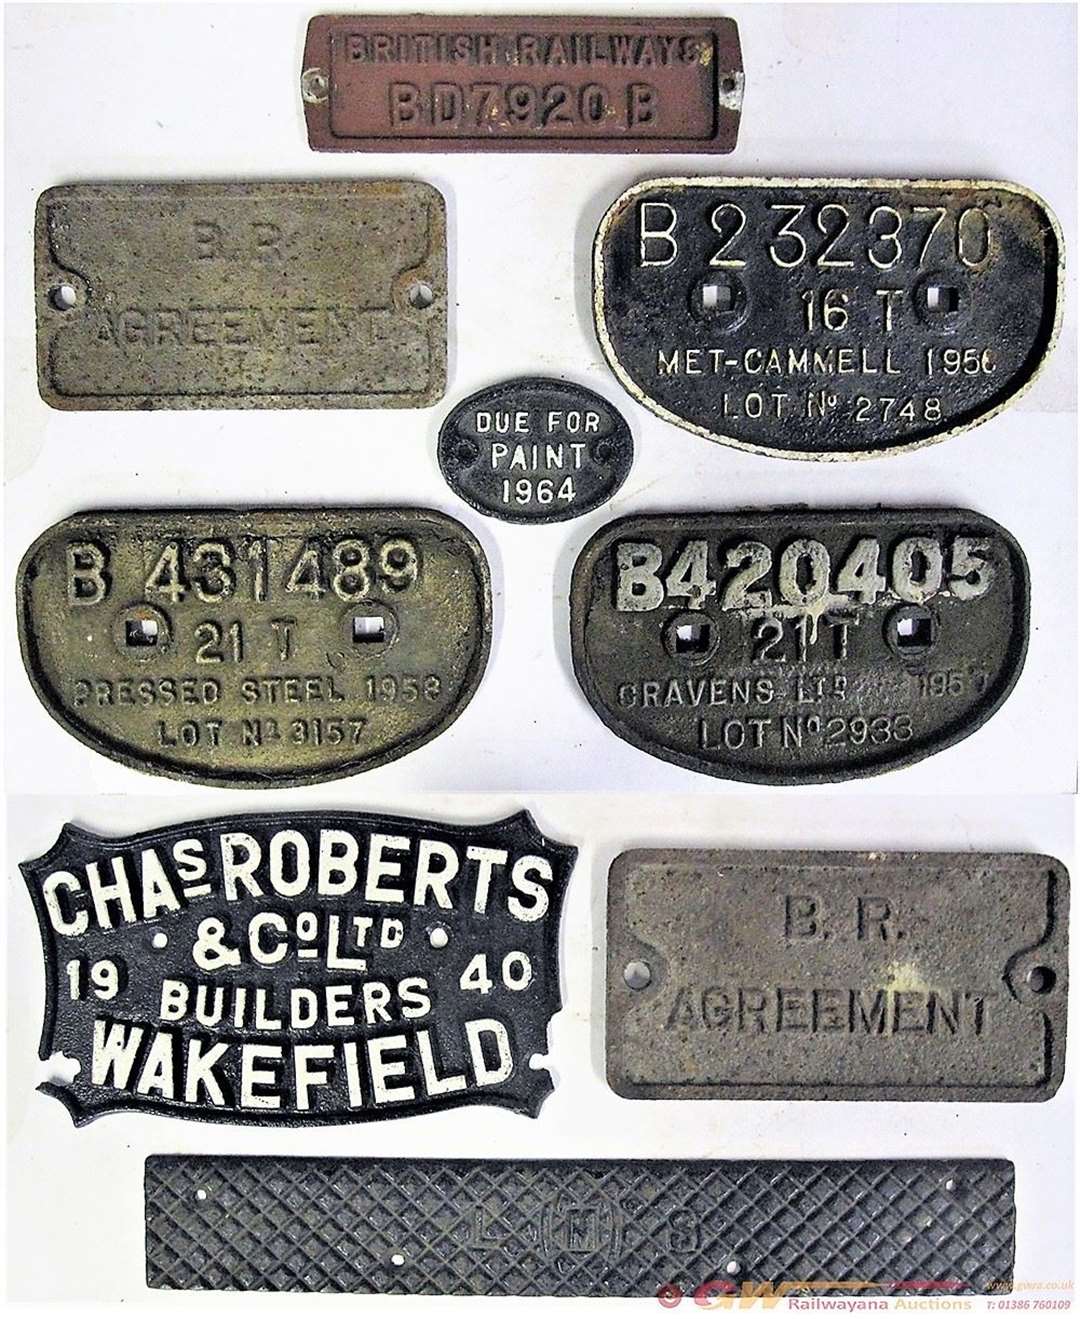 Image shared to Mr Shand showing various rail plates. The picture was shared from GW Railwayana Auctions Ltd website.